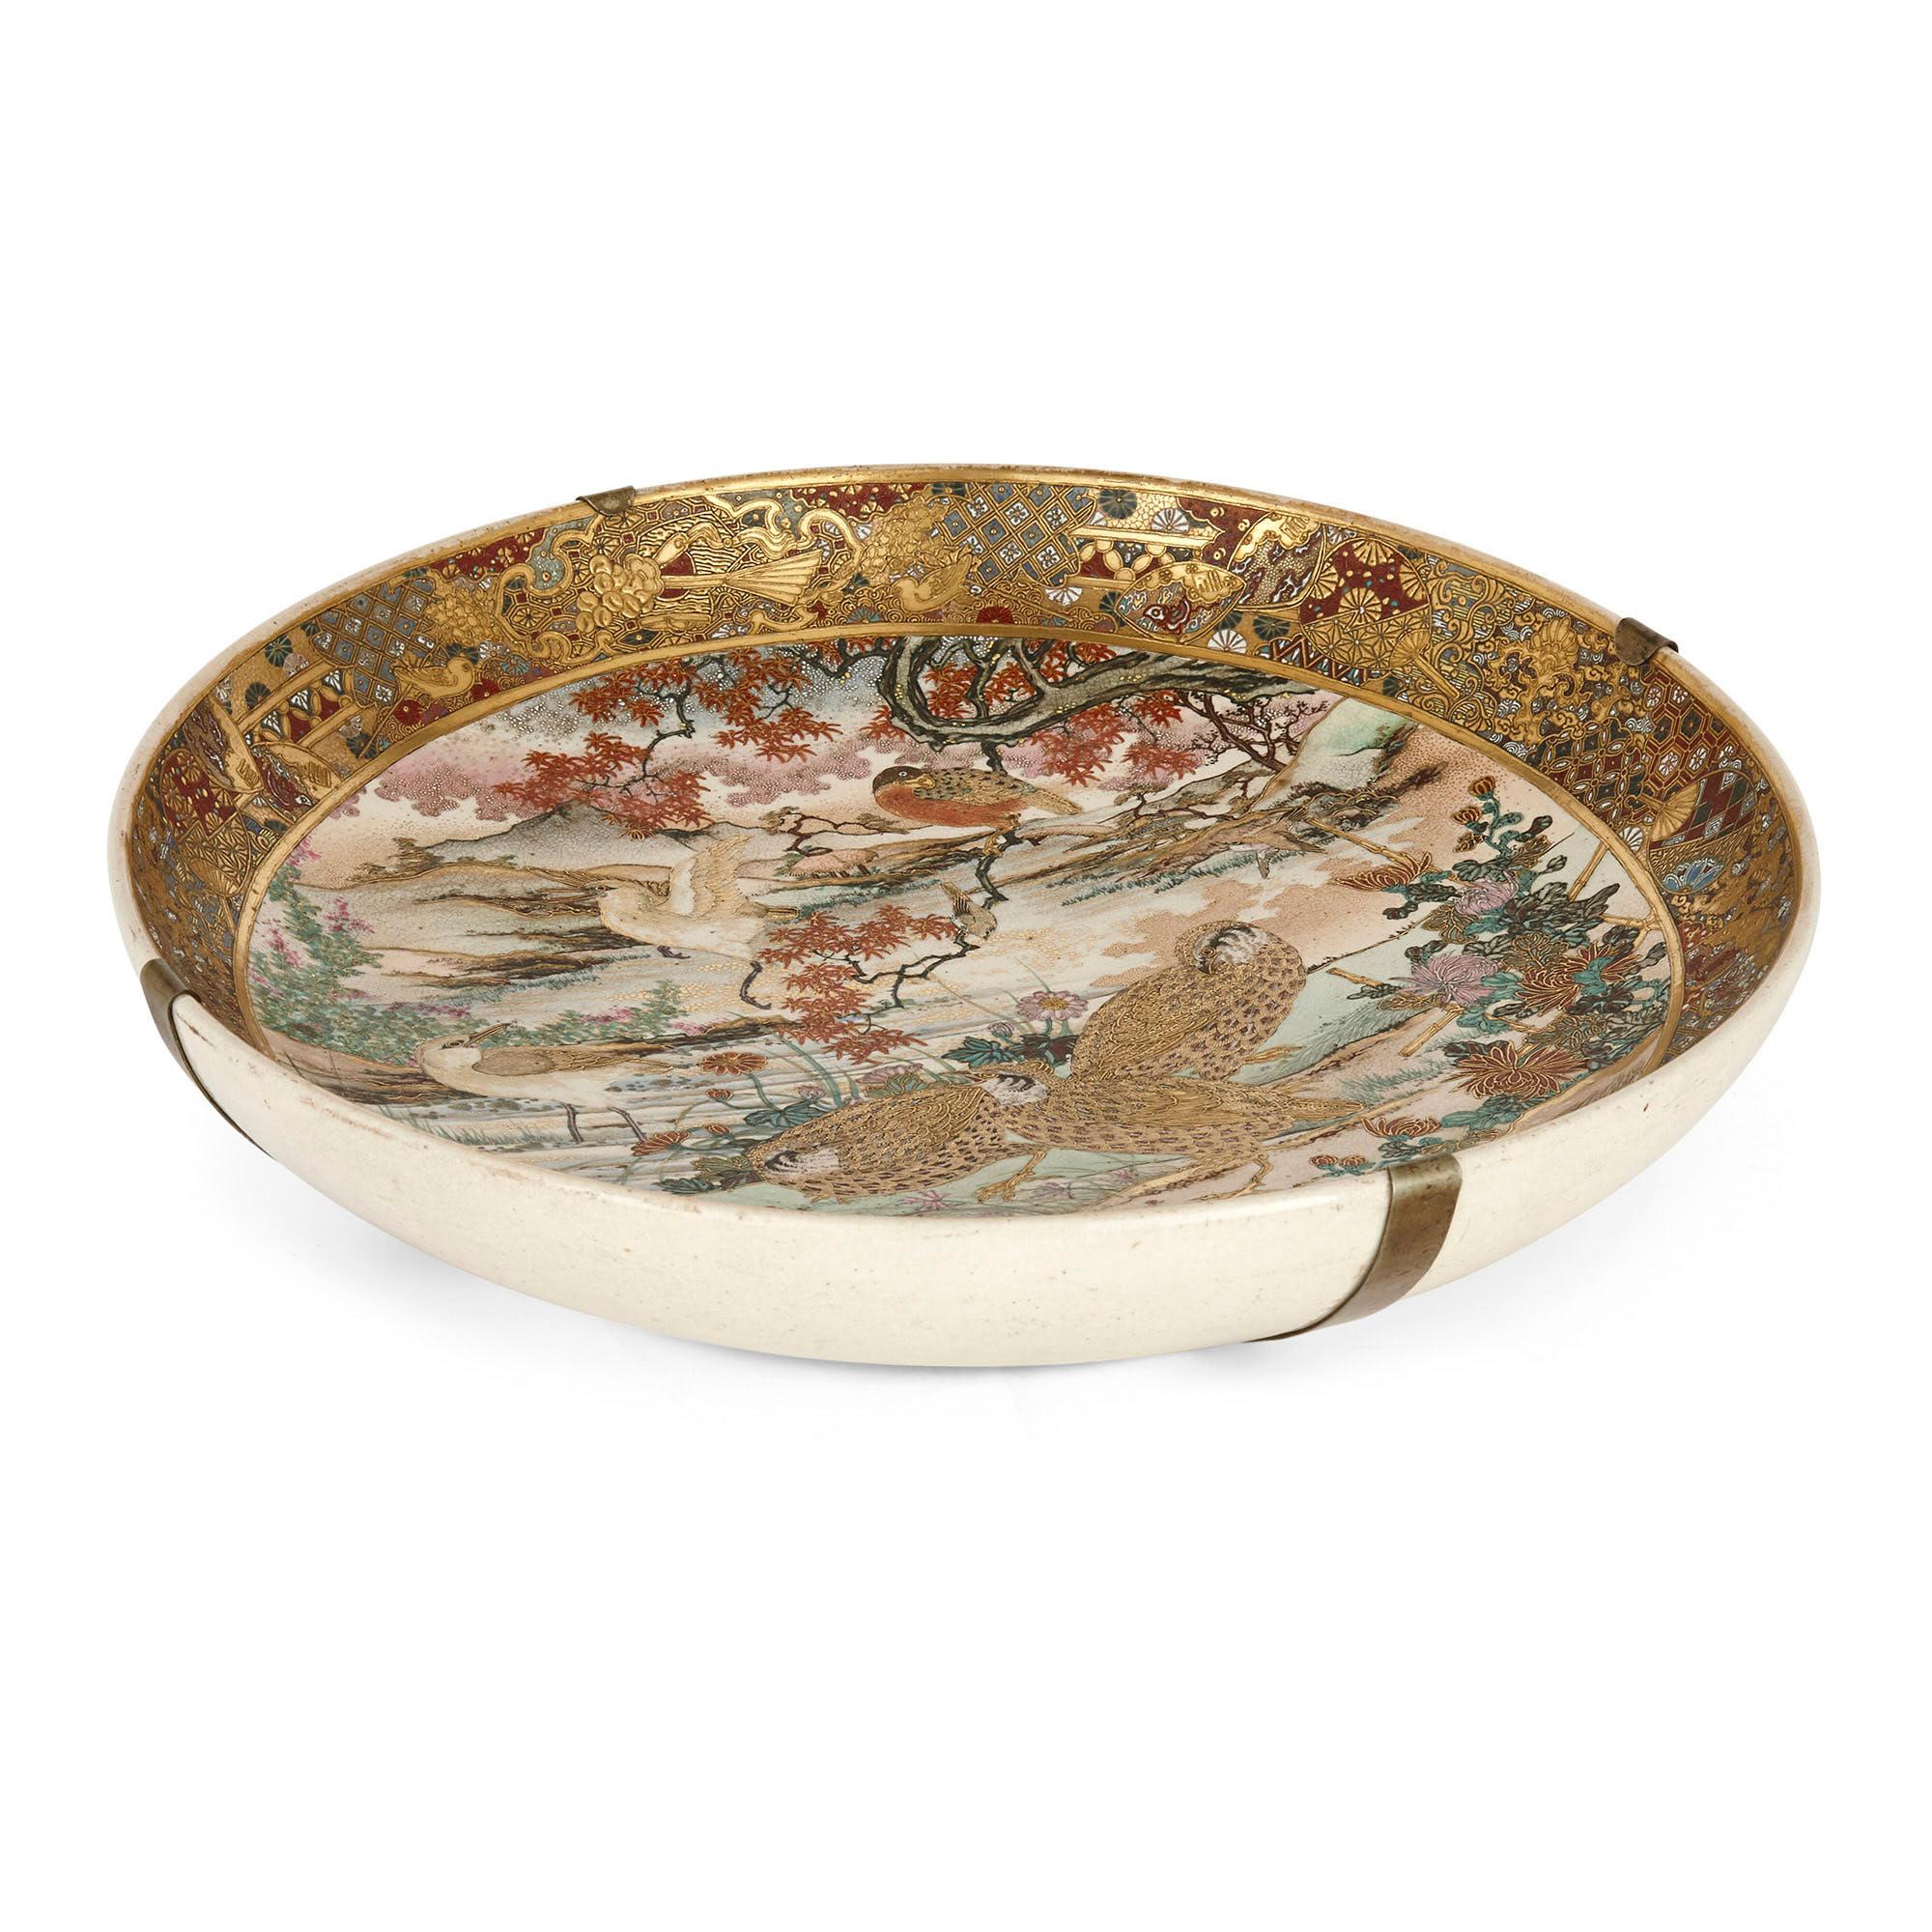 Antique Japanese parcel-gilt porcelain dish
Japanese, late 19th century
Measures: Height 7.5cm, diameter 37cm

This fine porcelain dish is a superb piece Satsuma ware from the Meiji period: Satsuma ware being a Japanese style designed to appeal